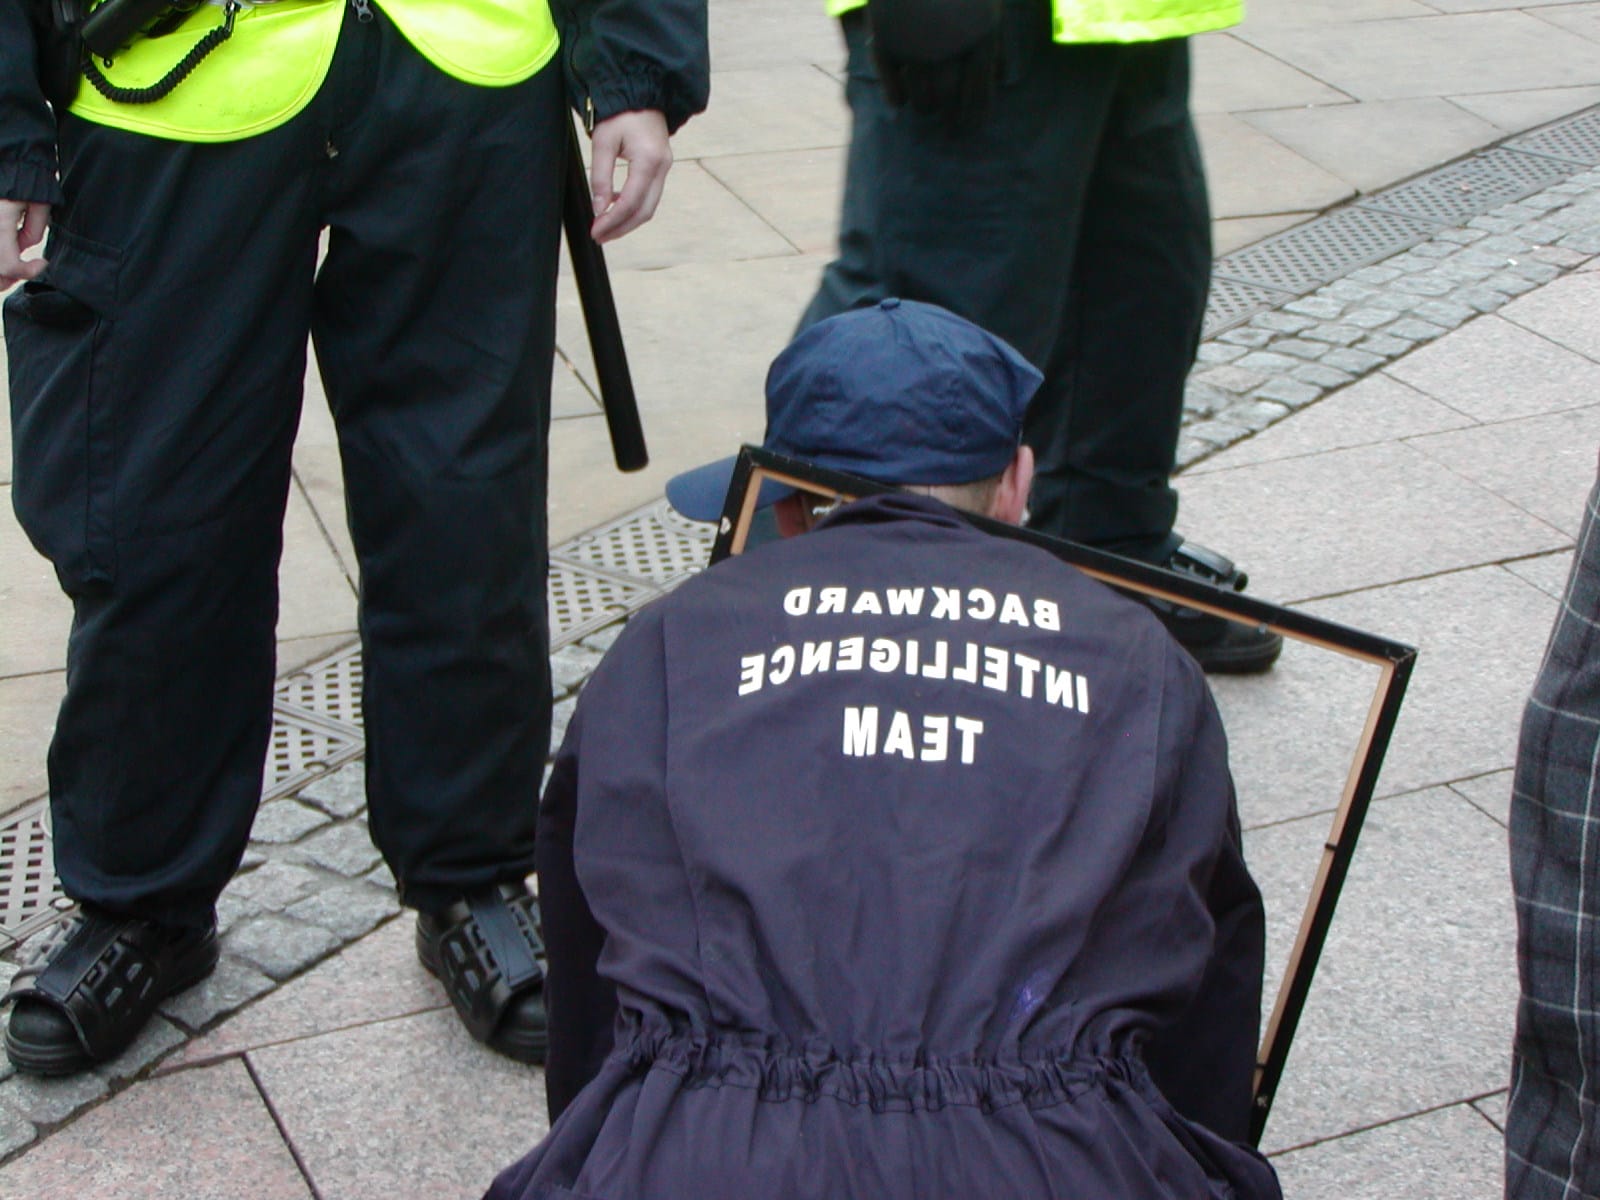 A protesting performance artist crawling in front of cops, wearing overalls that say "backward intelligence team" written in reverse, and a frame around their neck